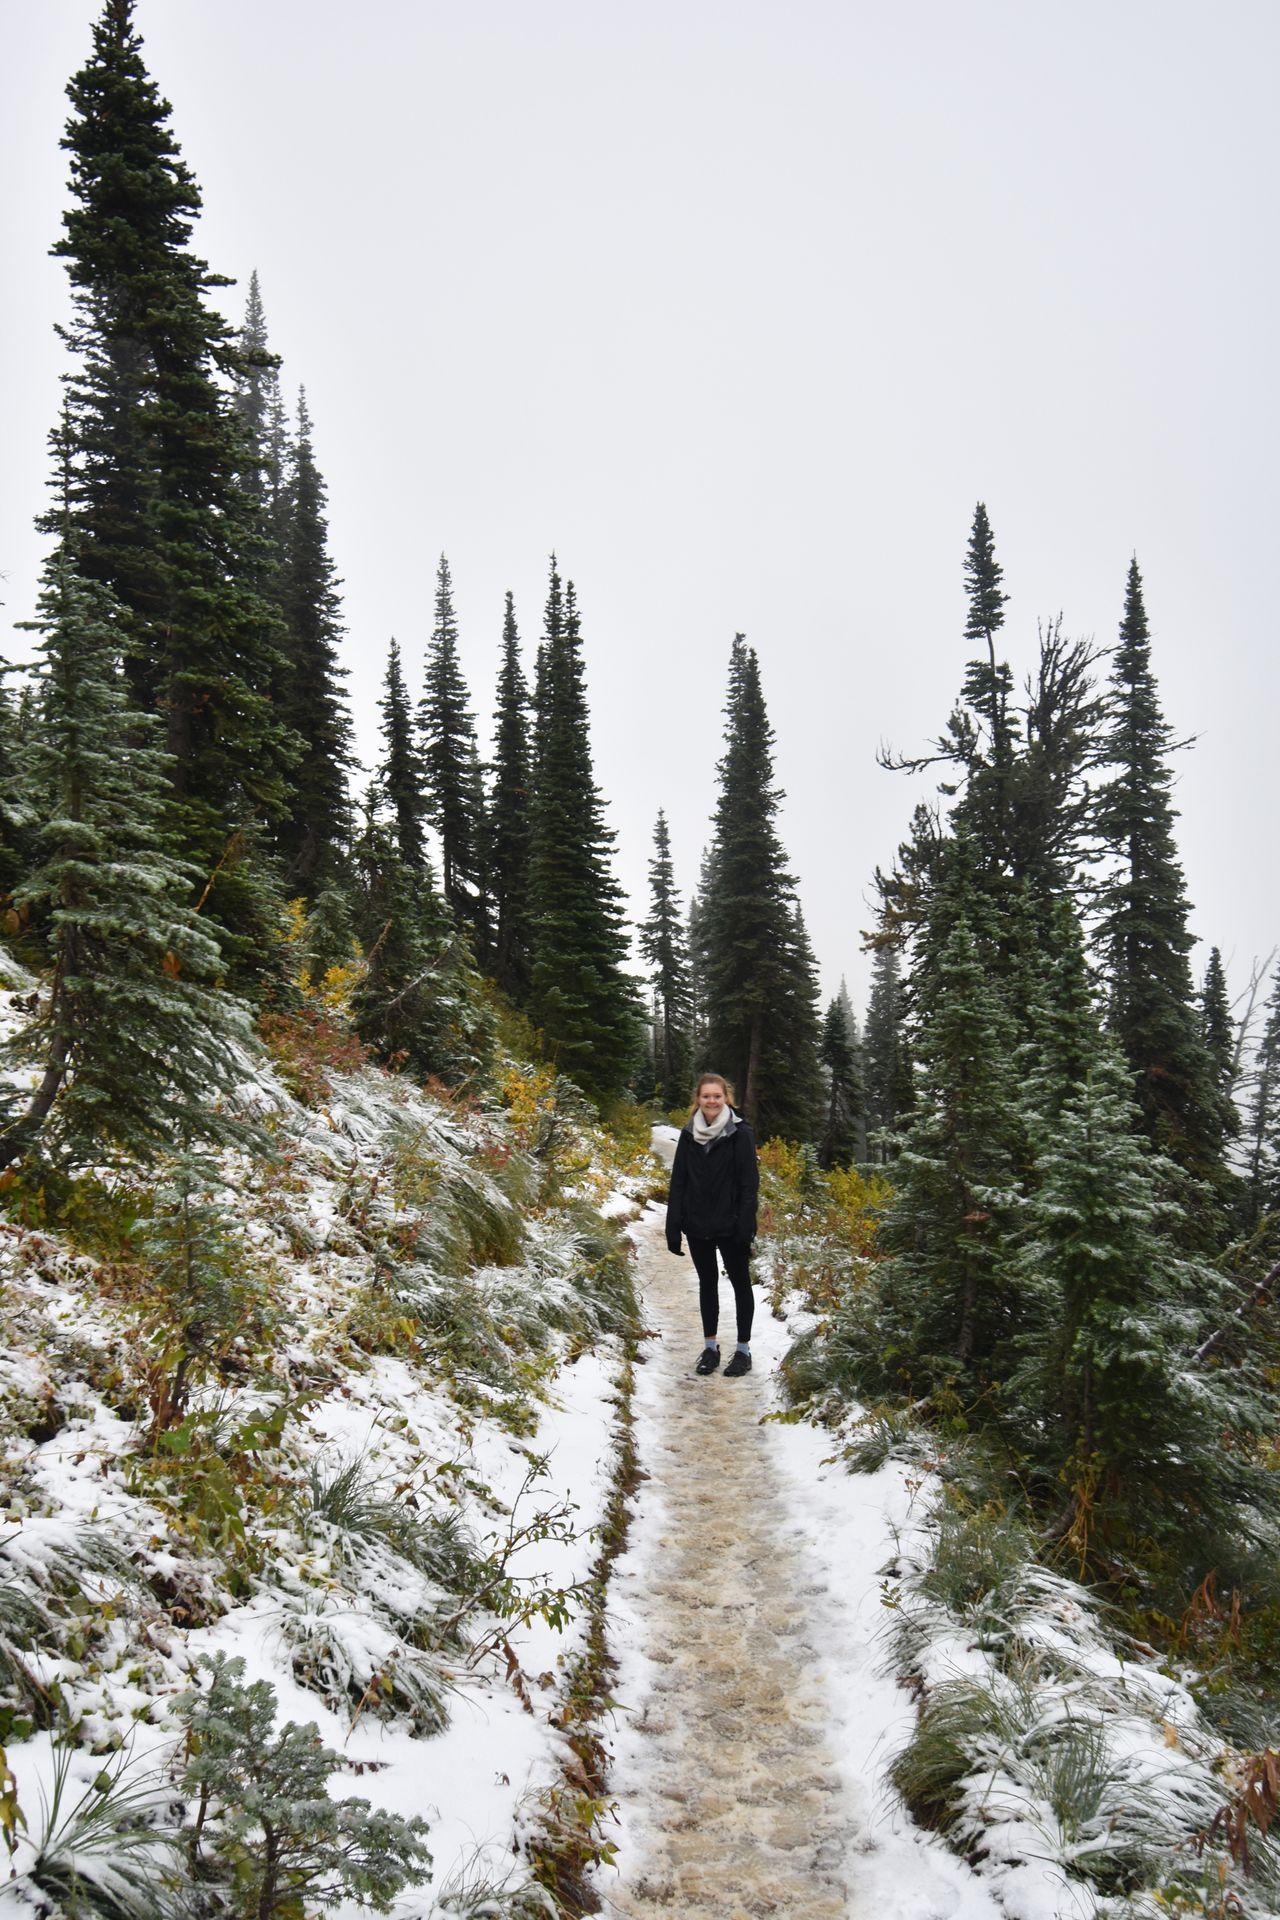 Lydia standing on a snowy trail surrounded by pine trees.